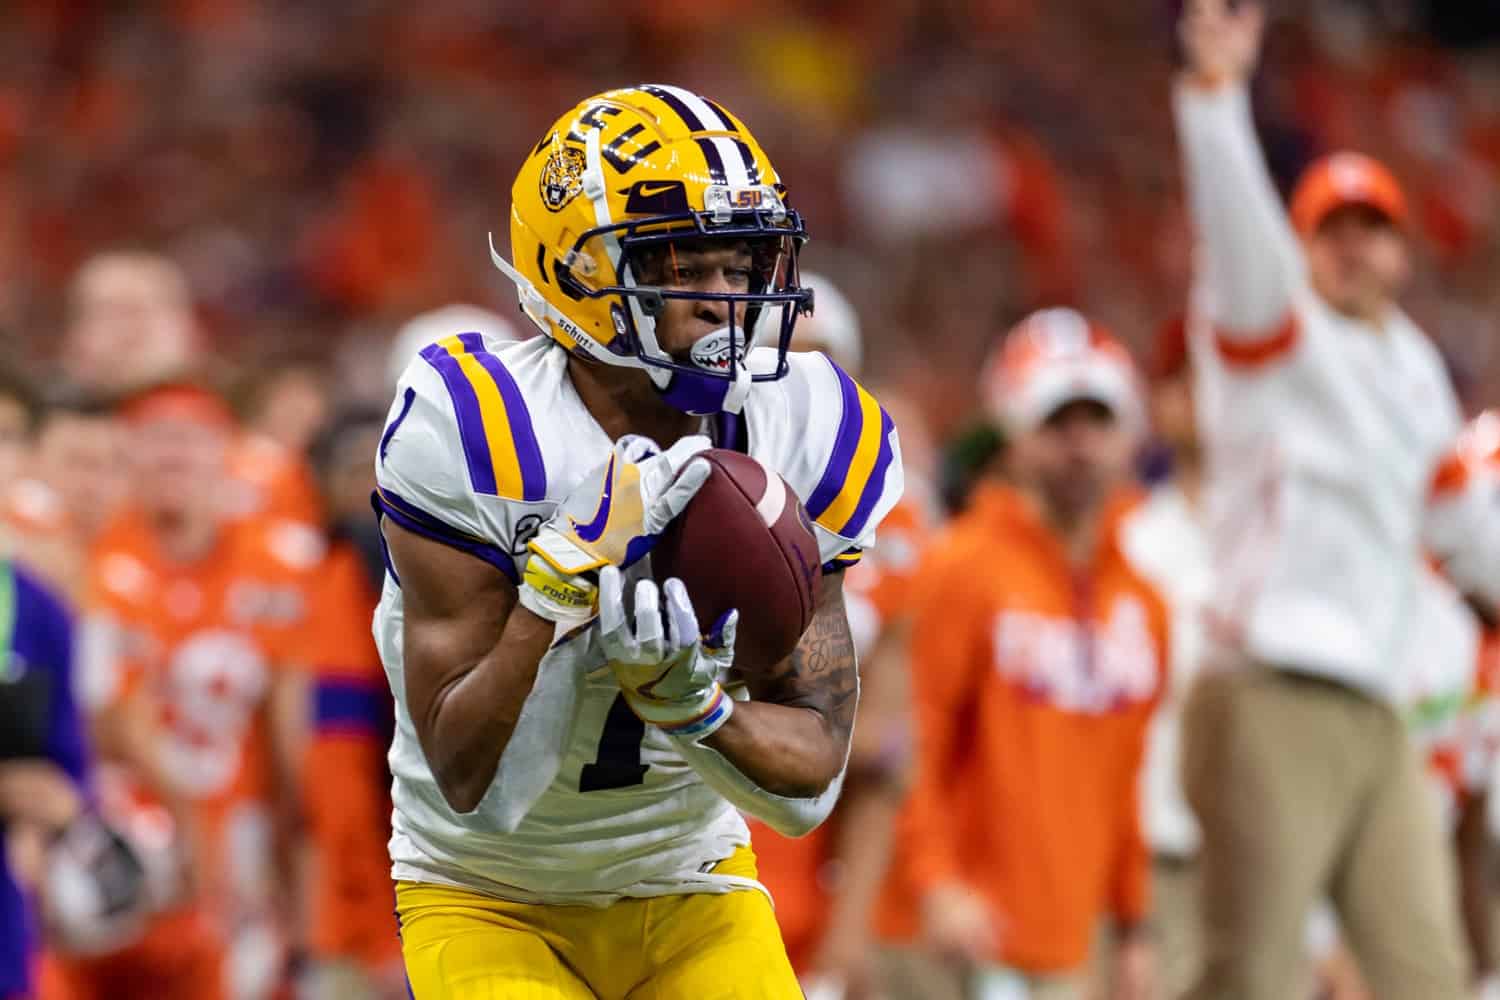 NFL Rumors & Draft News: Ja'Marr Chase's potential, teams moving up for QBs, and more